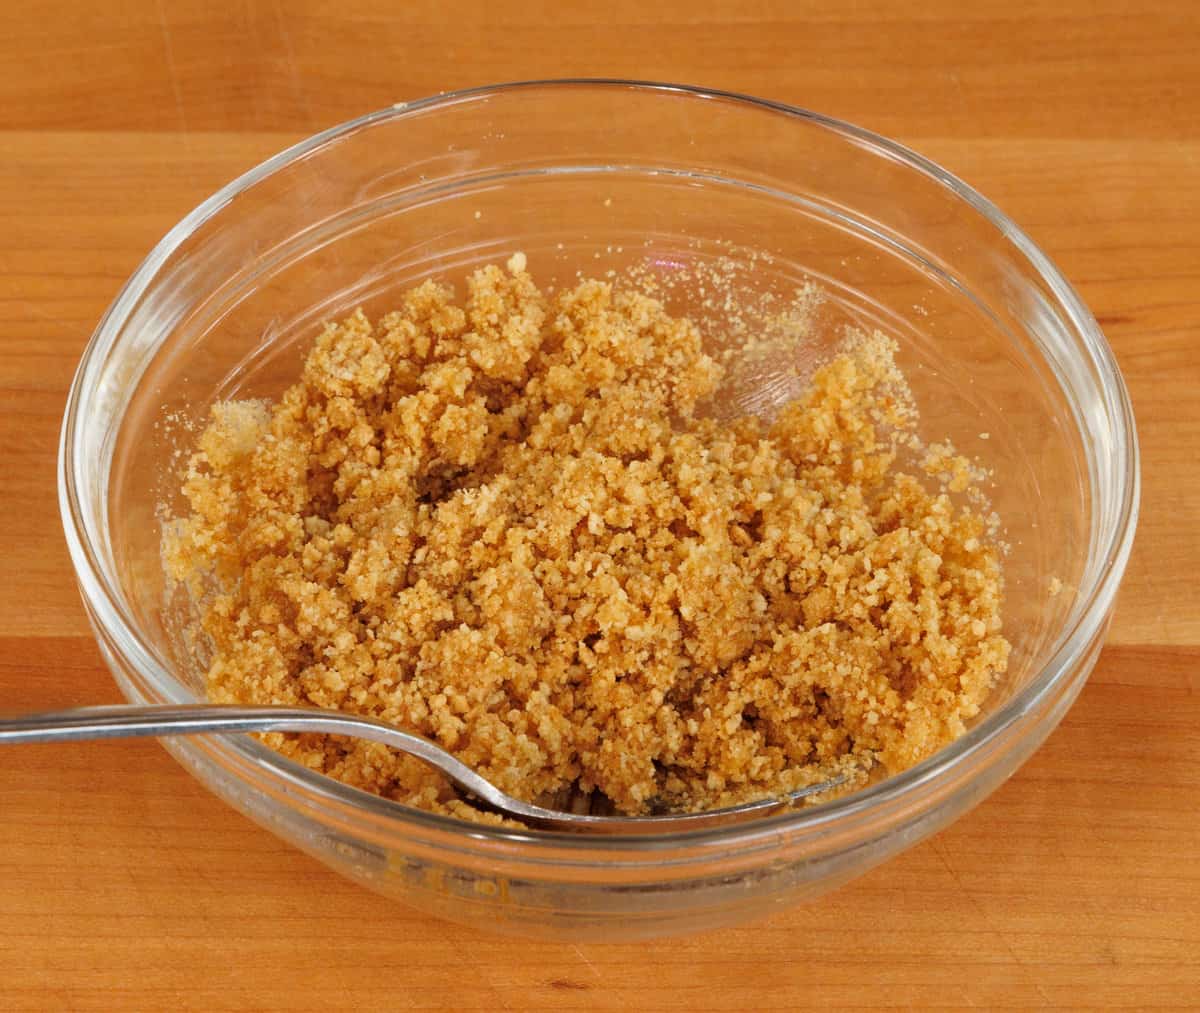 graham cracker crumbs and melted butter in a small bowl.